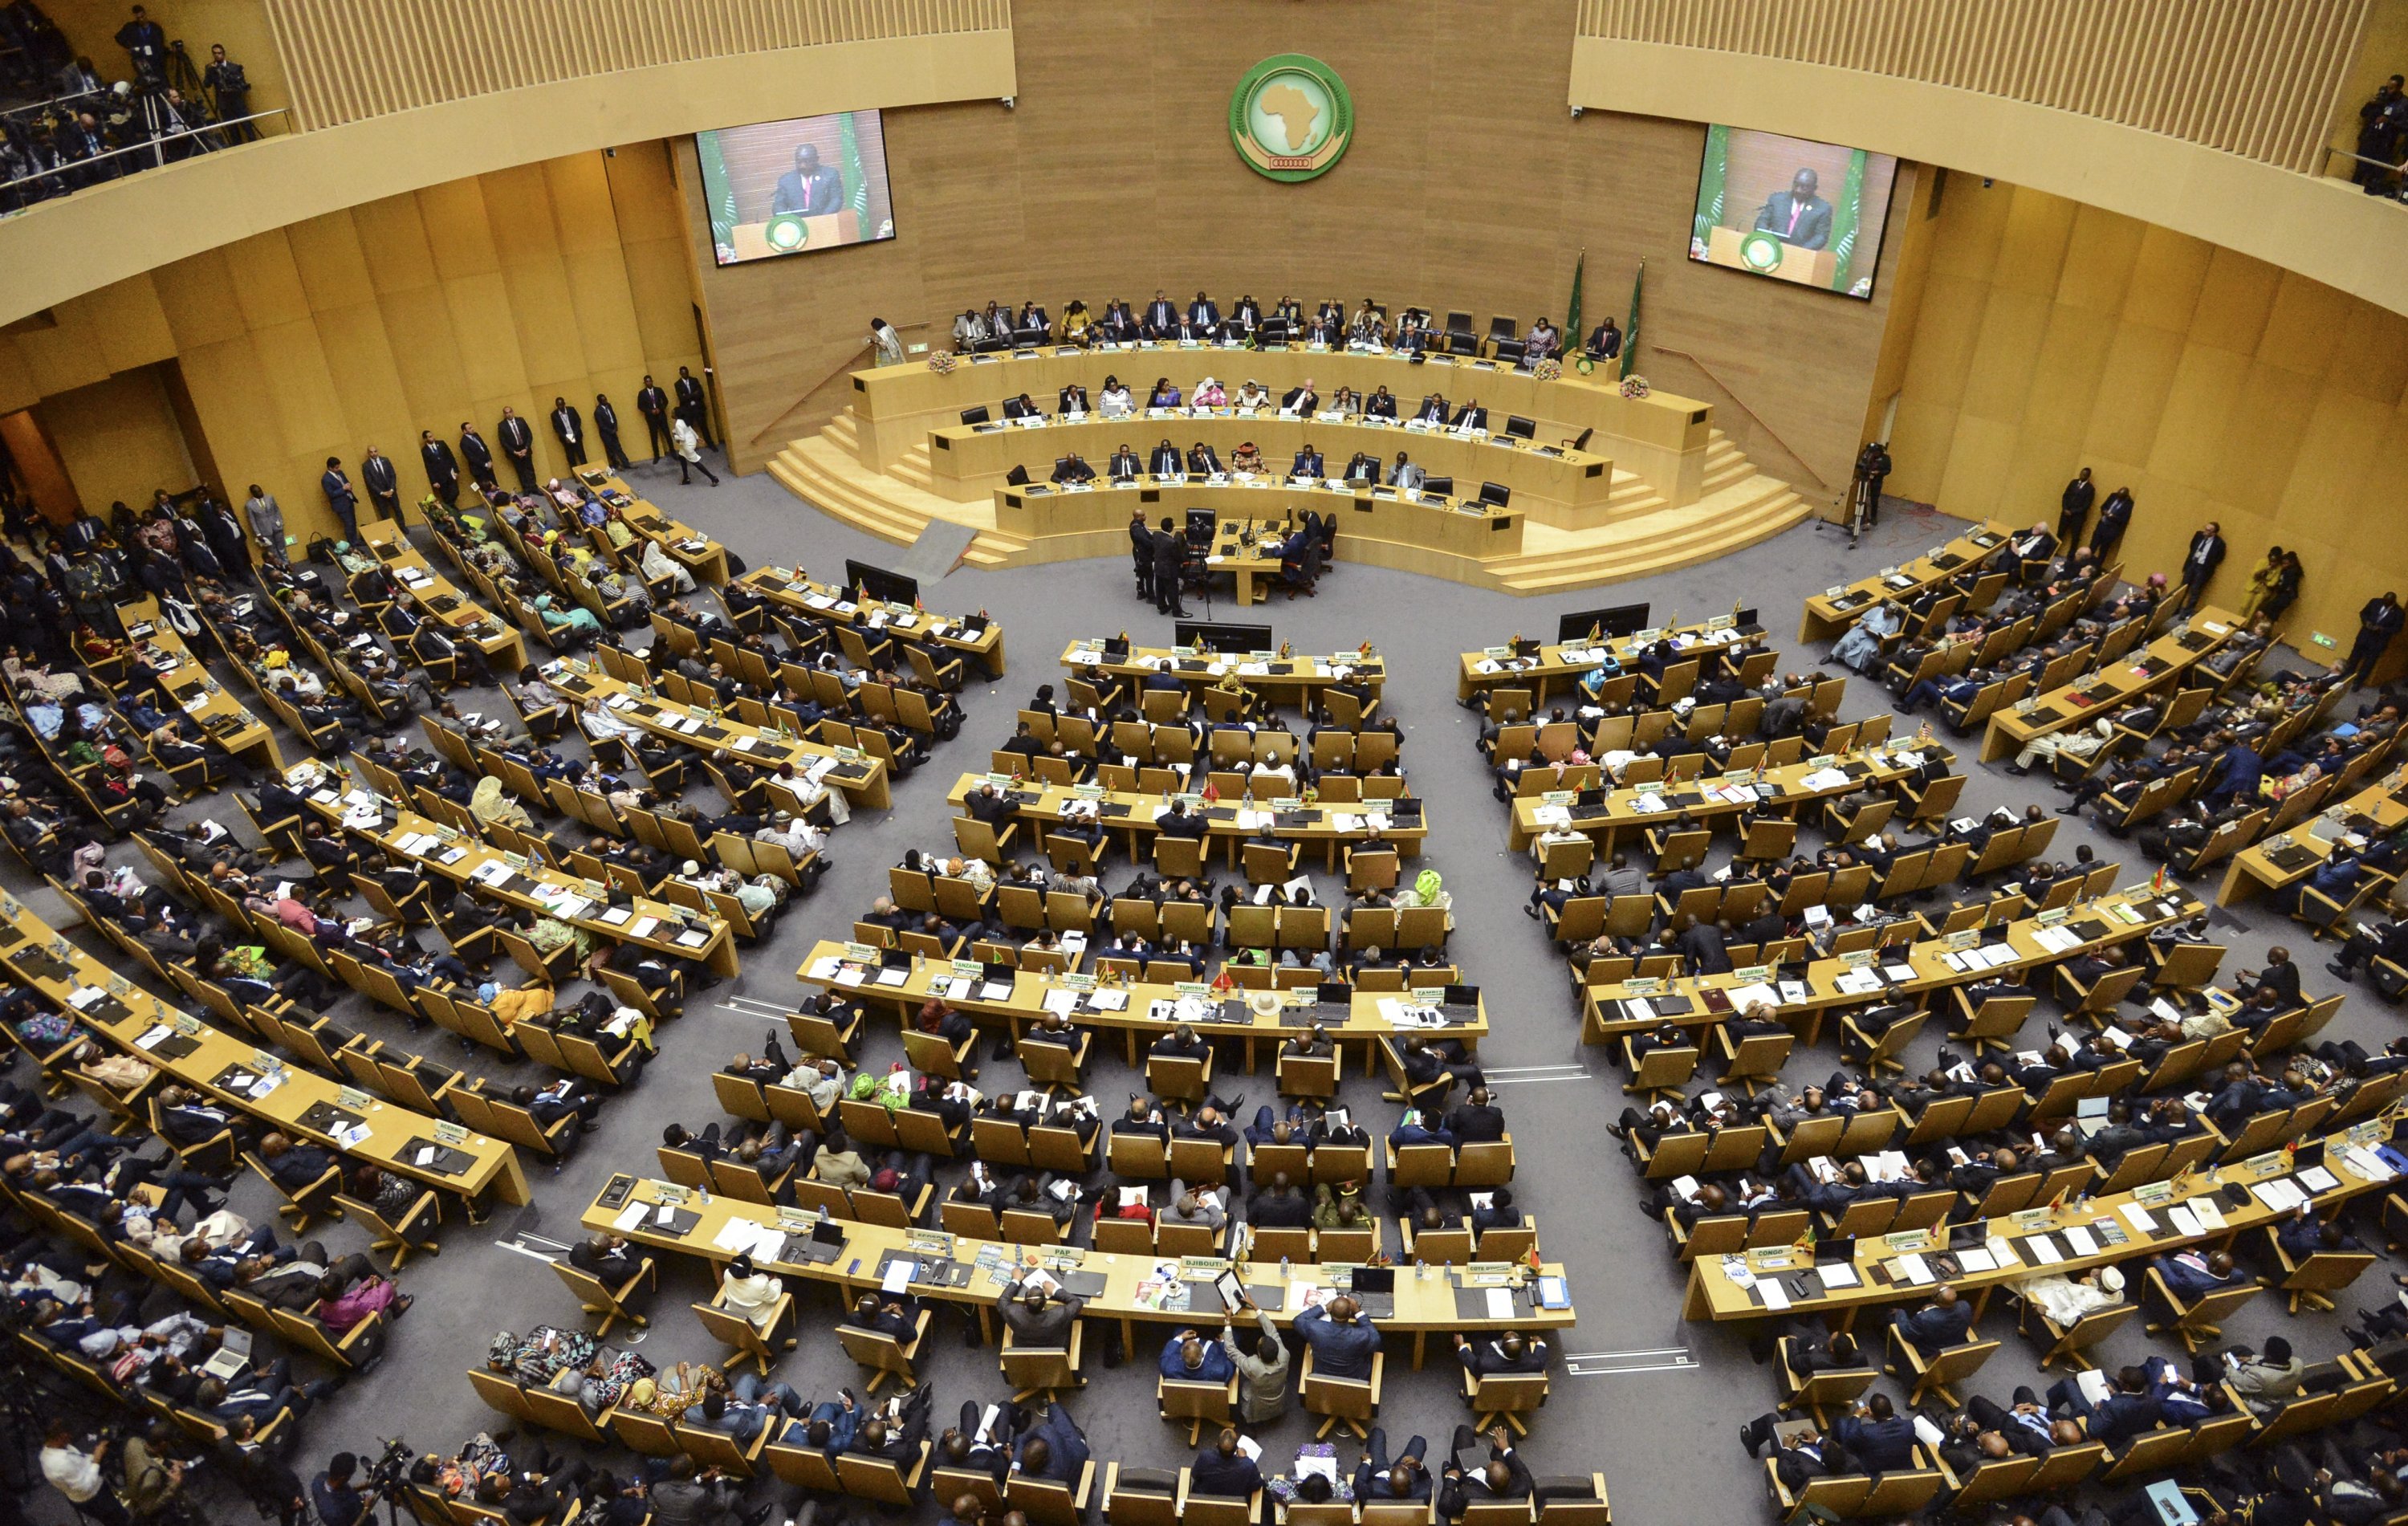 Inexplicable&#39;: S. Africa slams Israel&#39;s African Union observer status | Daily Sabah